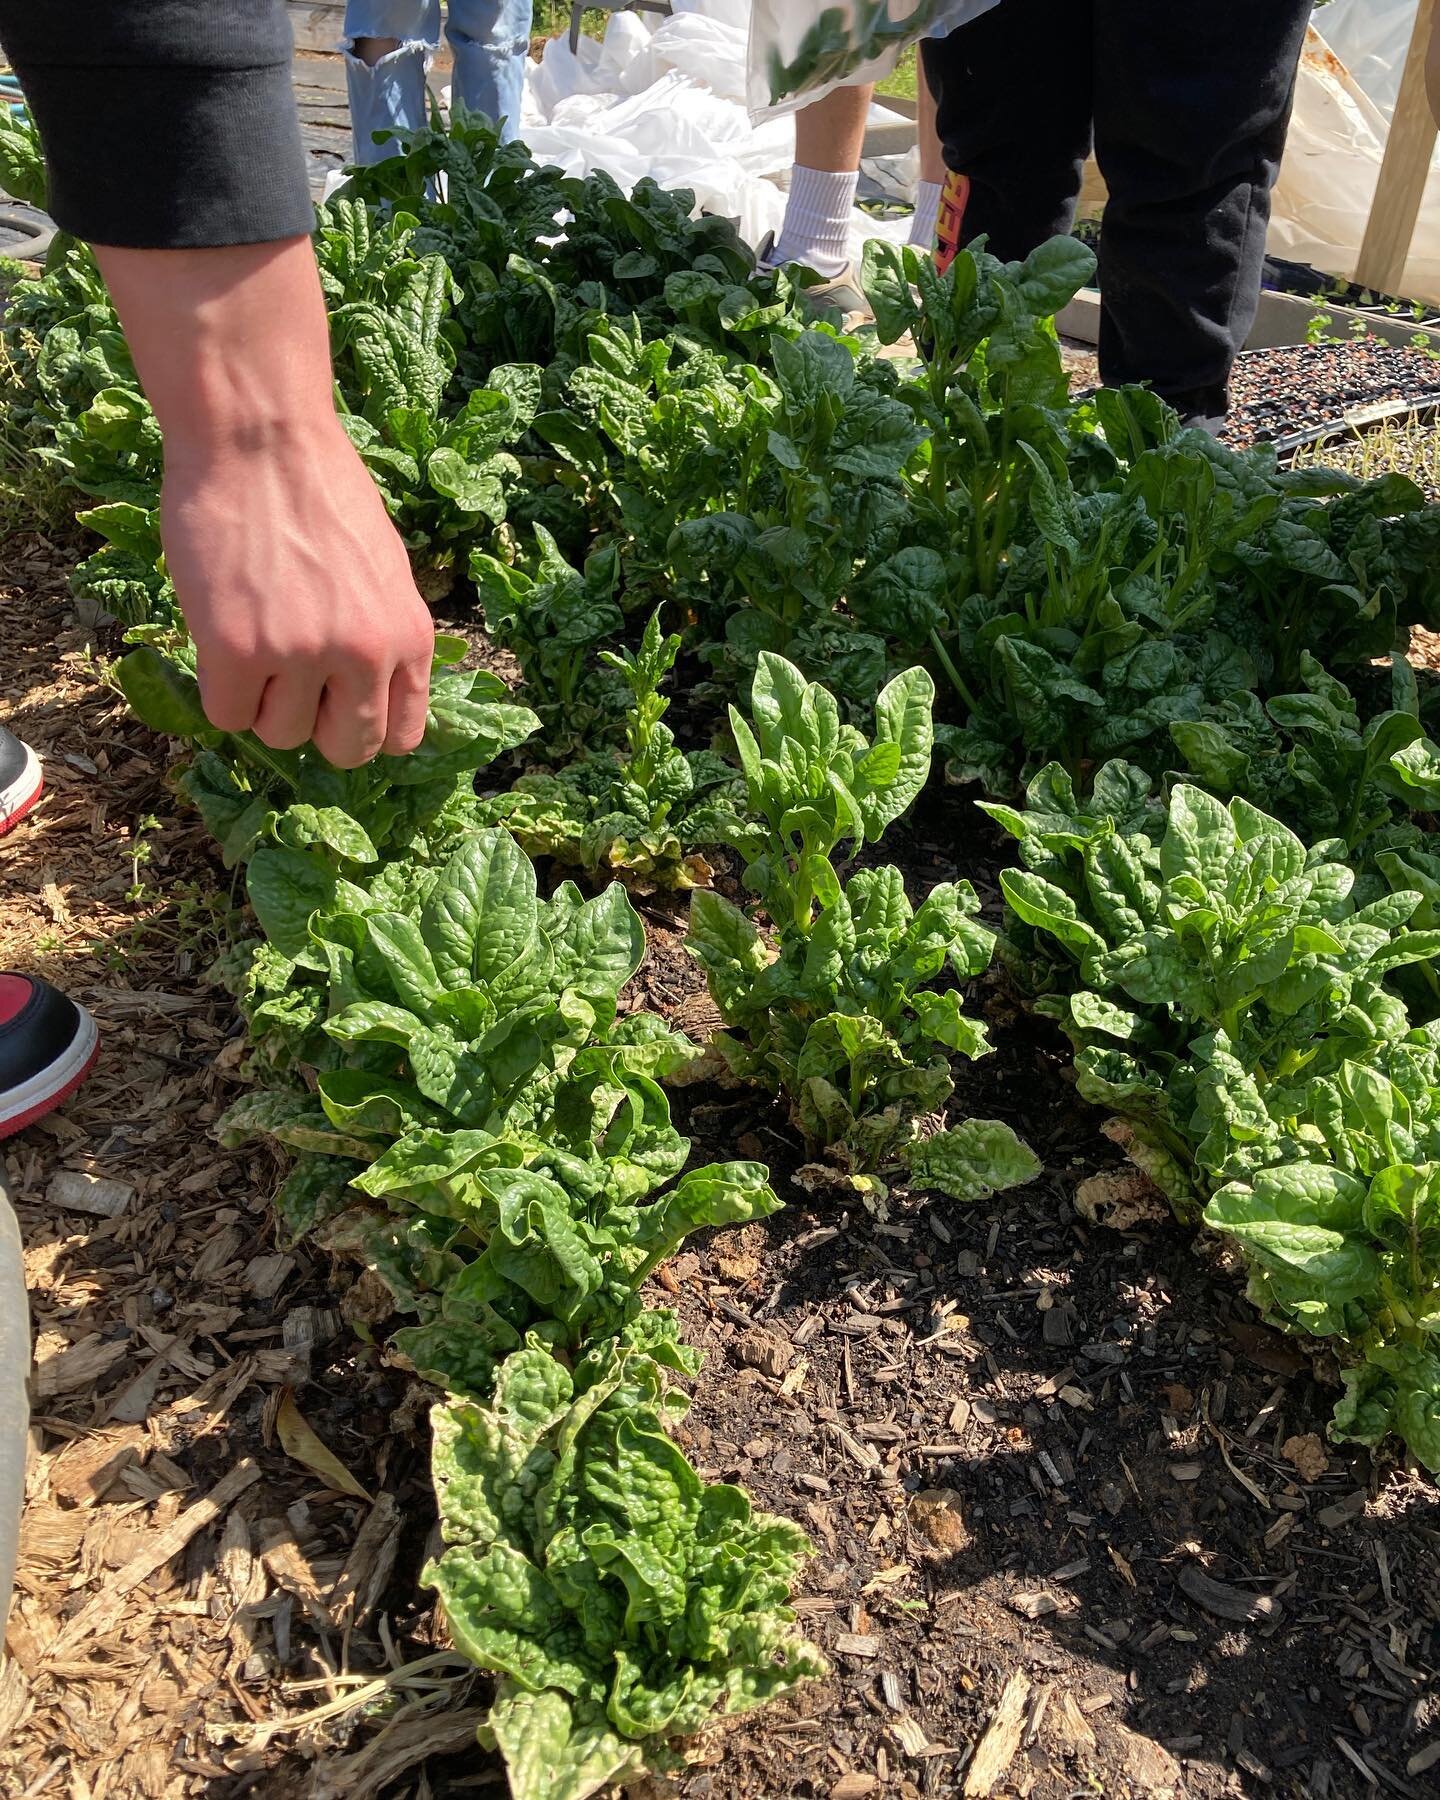 Spinach harvesting this morning!  Somehow, this is the only type of greens that our resident groundhogs don&rsquo;t like.  Does anyone know if groundhogs don&rsquo;t eat spinach or did we just luck out?  @cvilleschools 

#charlottesvillecityschools #